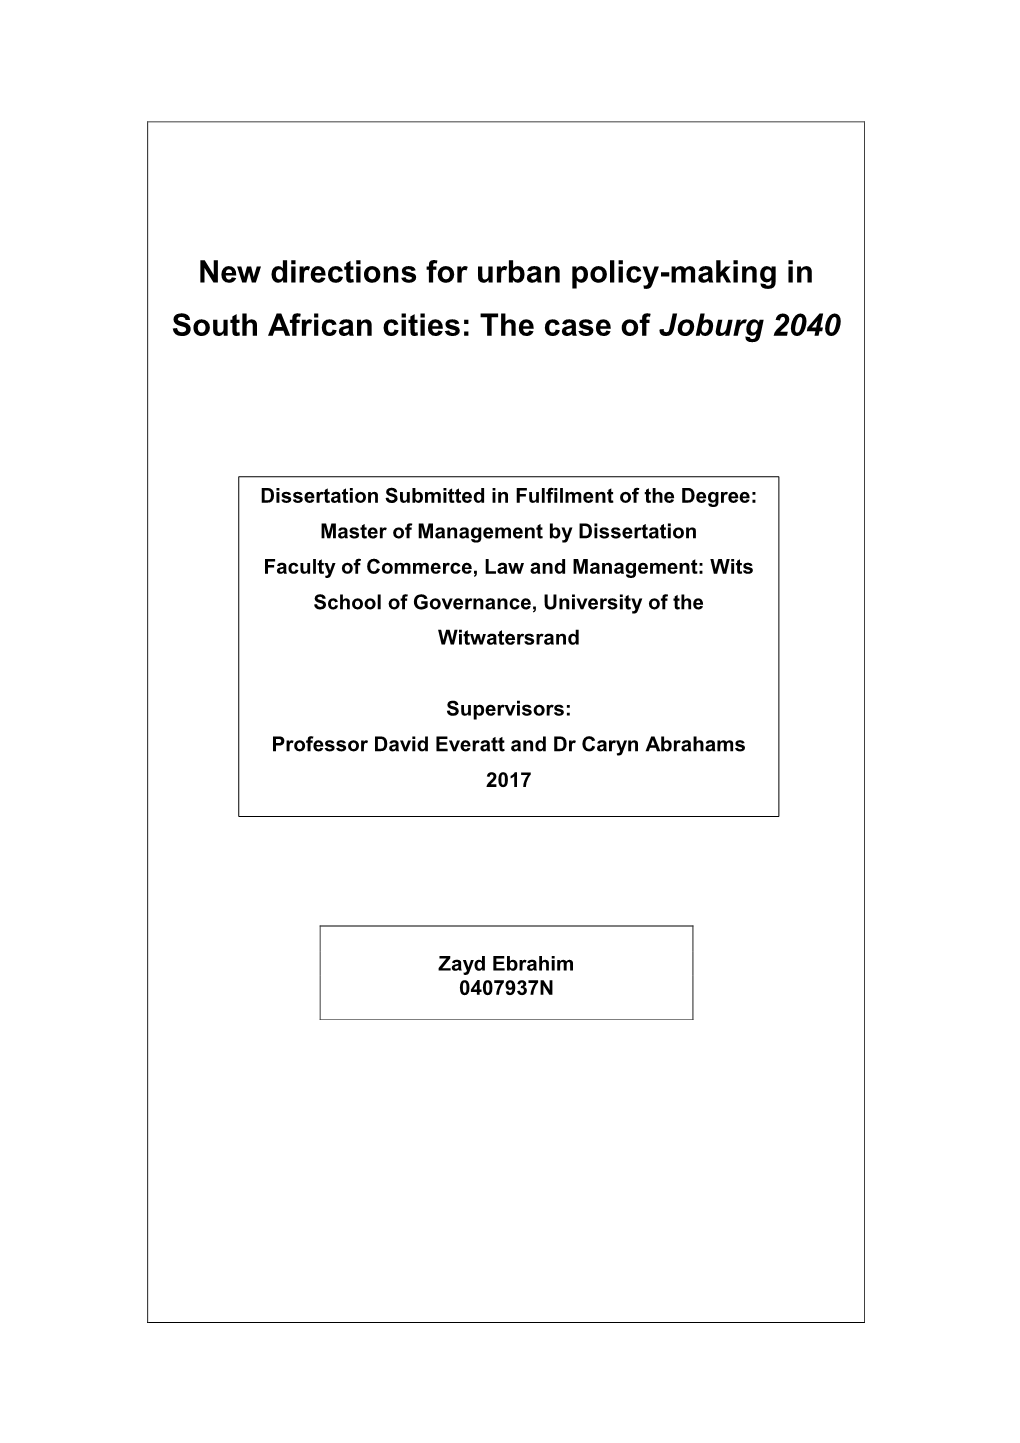 New Directions for Urban Policy-Making in South African Cities: the Case of Joburg 2040